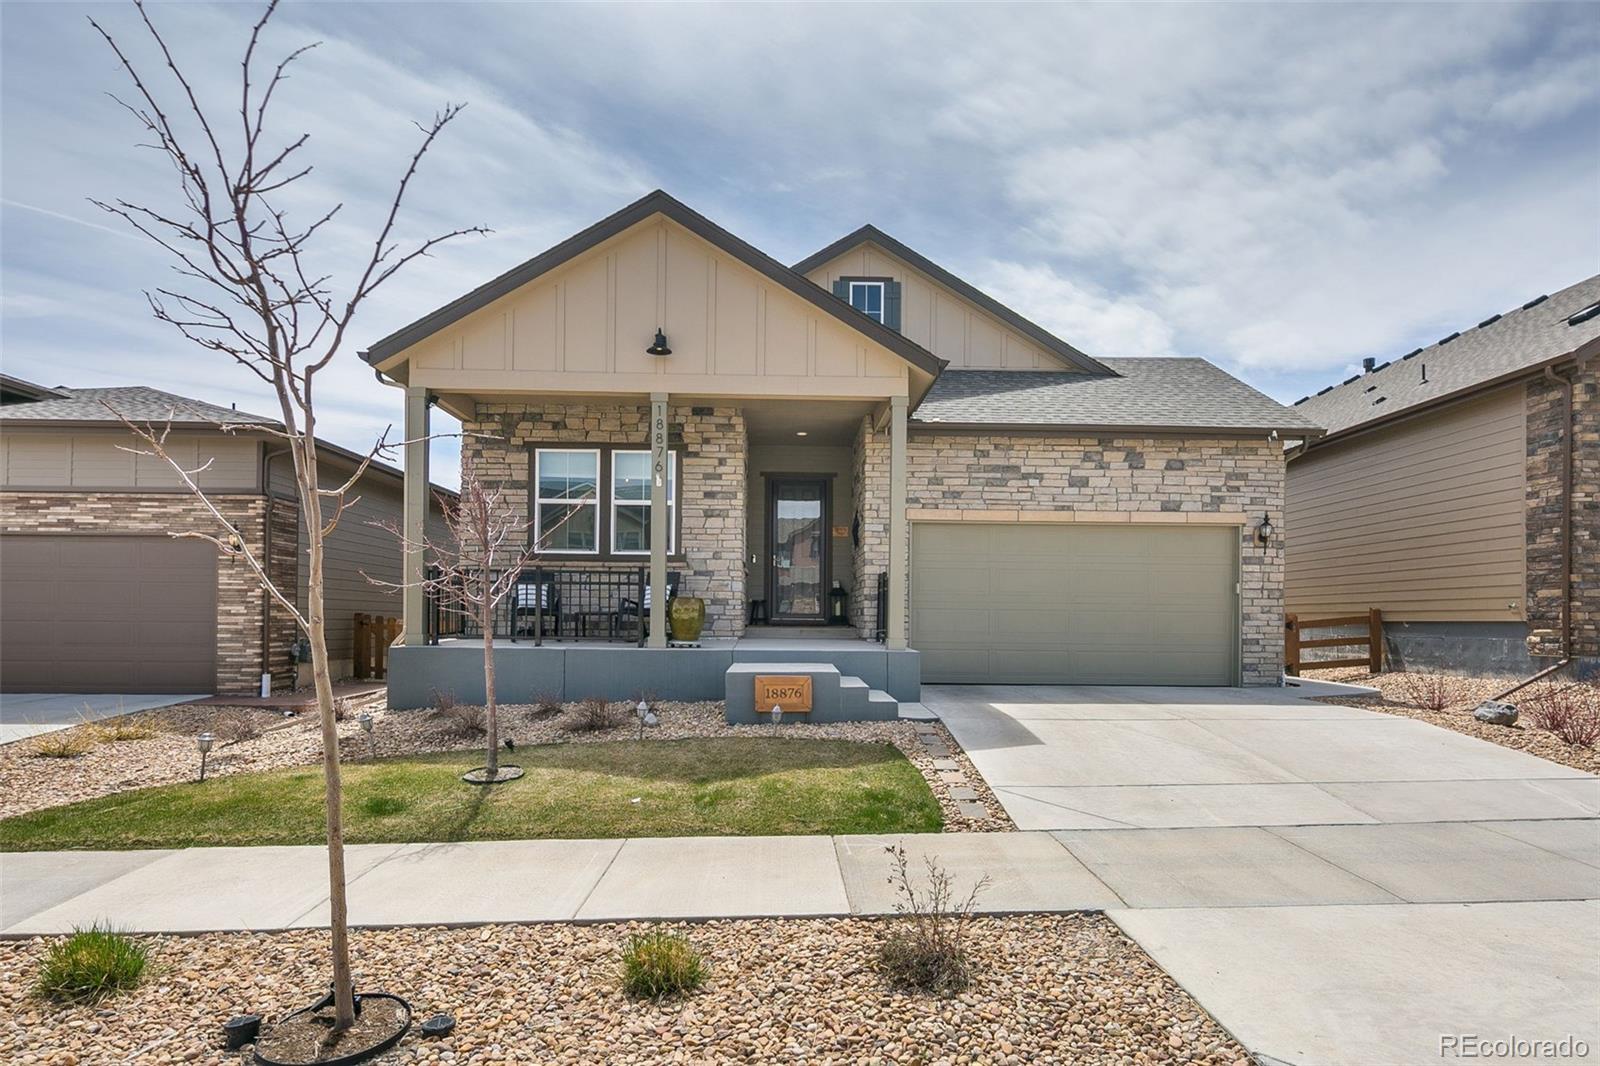 18876 93rd, Arvada, CO